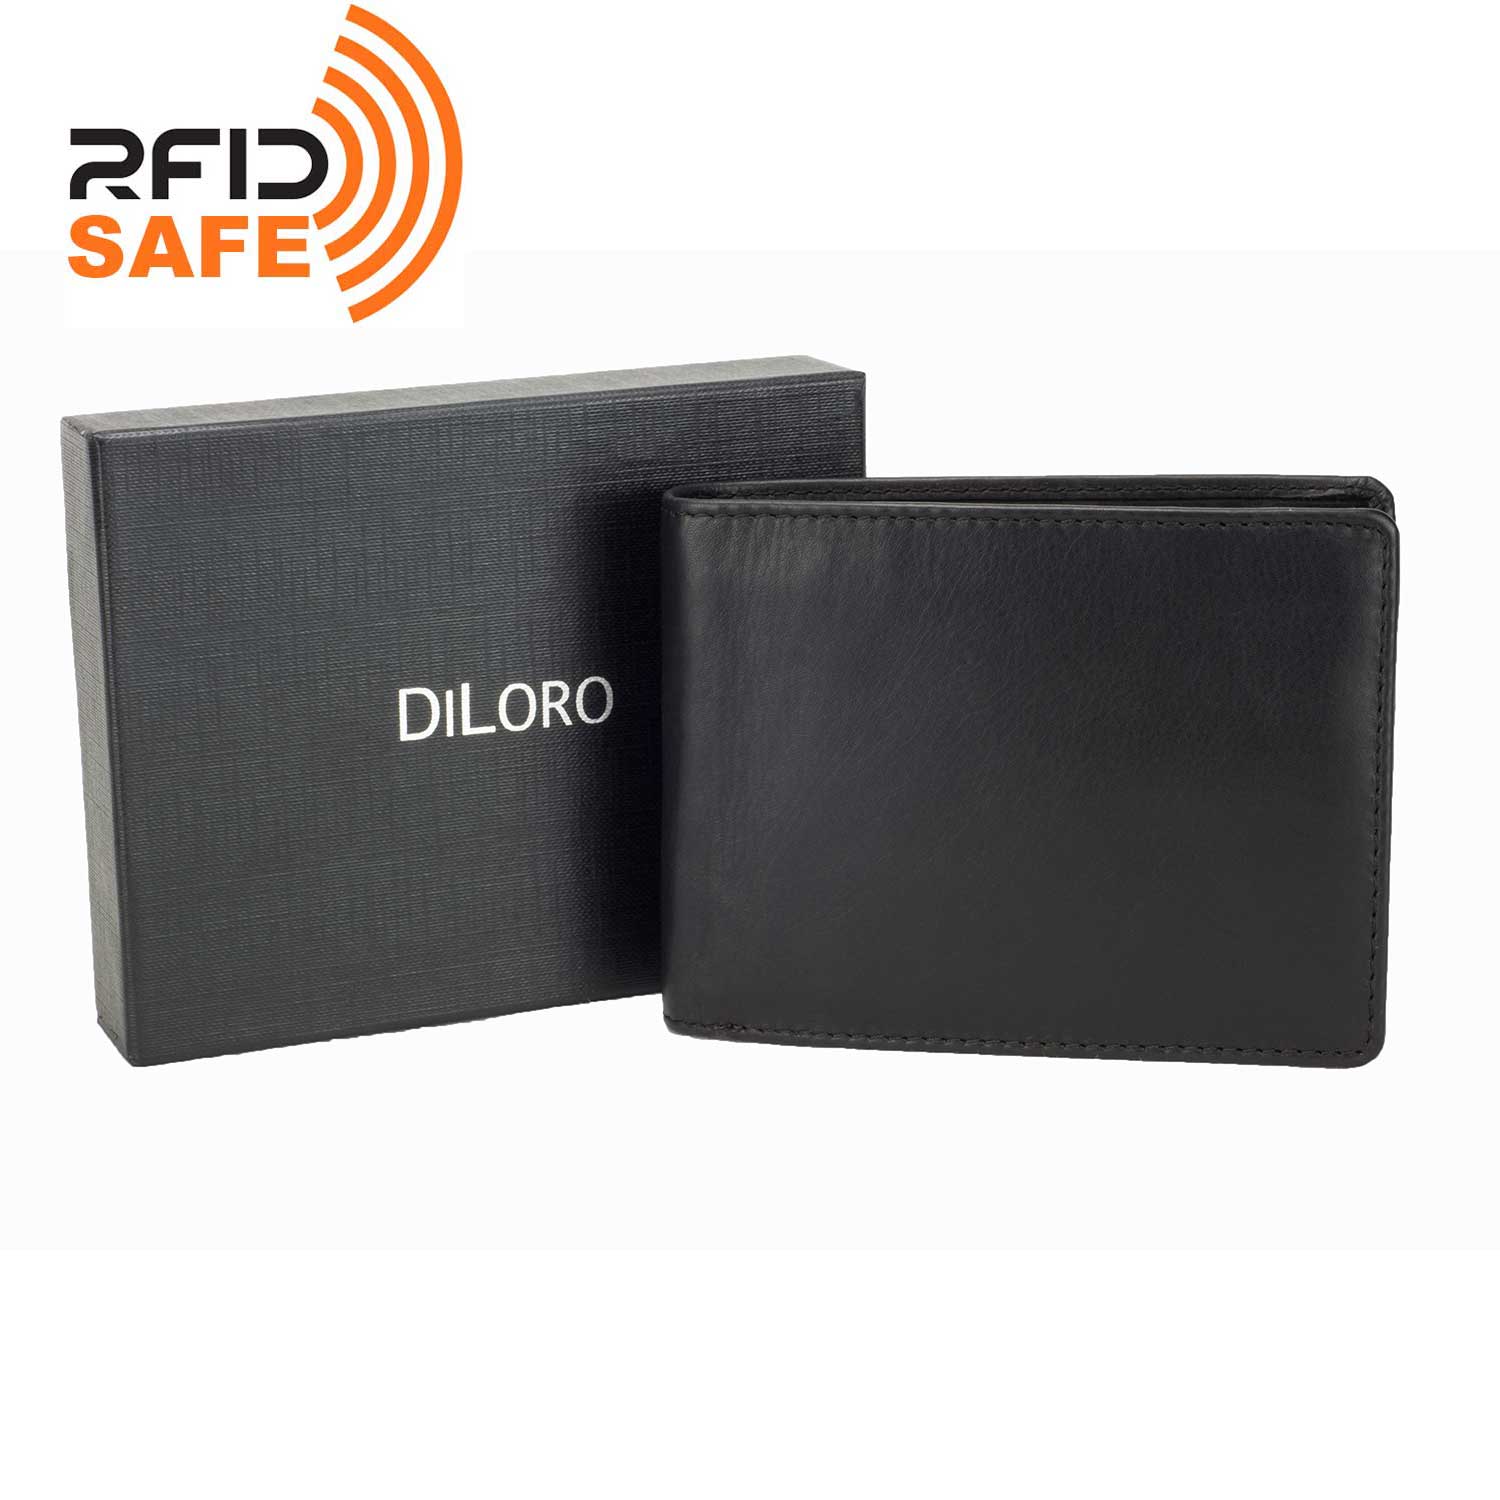 DiLoro Men's Leather Bifold Flip ID Zip Coin Wallet with RFID Protection in Black. Full grain nappa leather - best quality leather! SKU 1808 with DiLoro Gift Box.